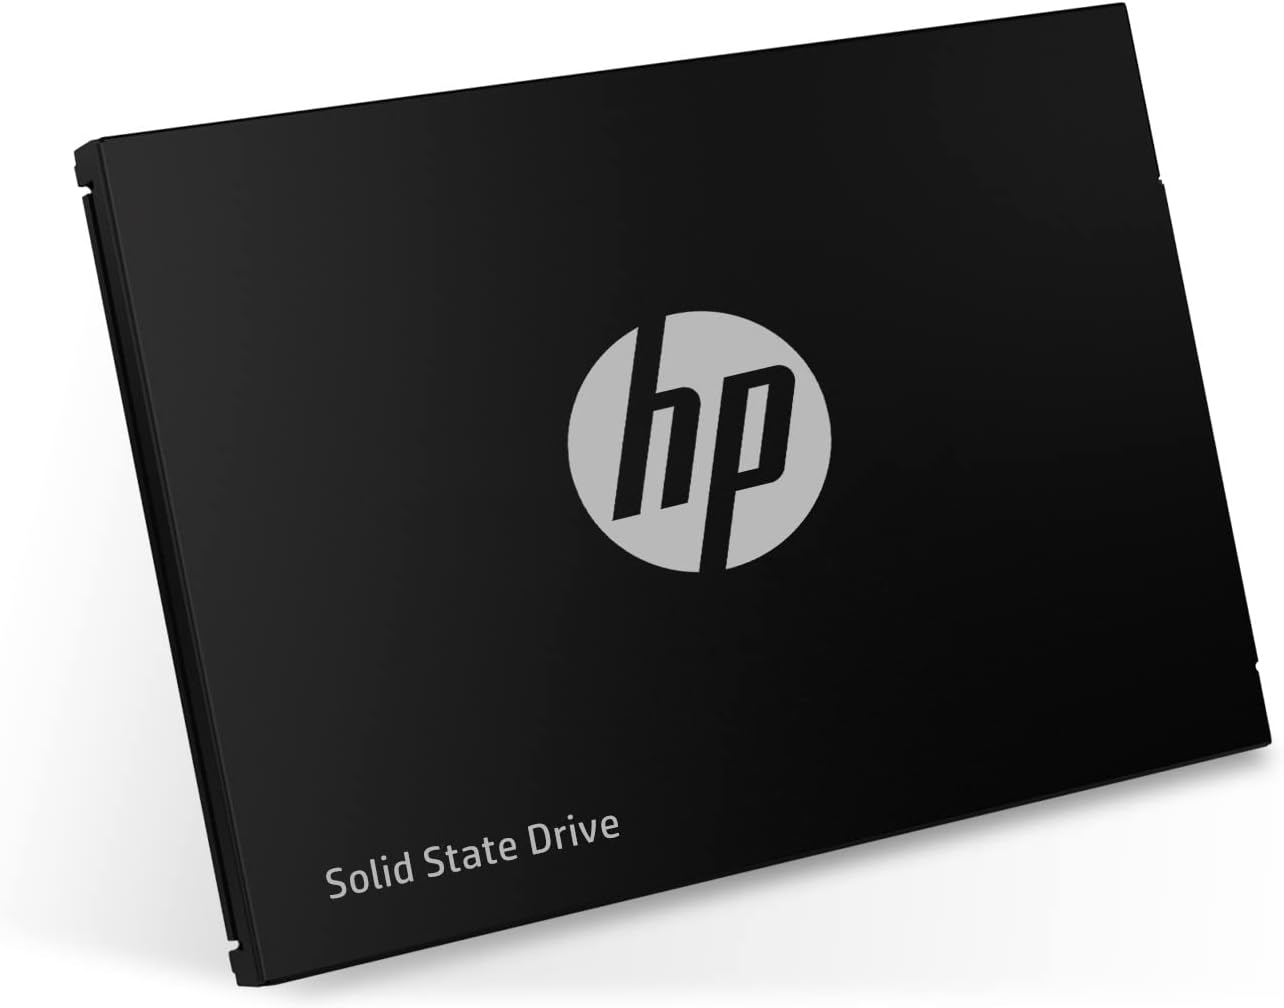 HP S750 1TB SATA III 2.5 Inch PC SSD, 6 Gb/s, 3D NAND Internal Solid State Hard Drive Up to 560 MB/s - 16L54AA#ABA